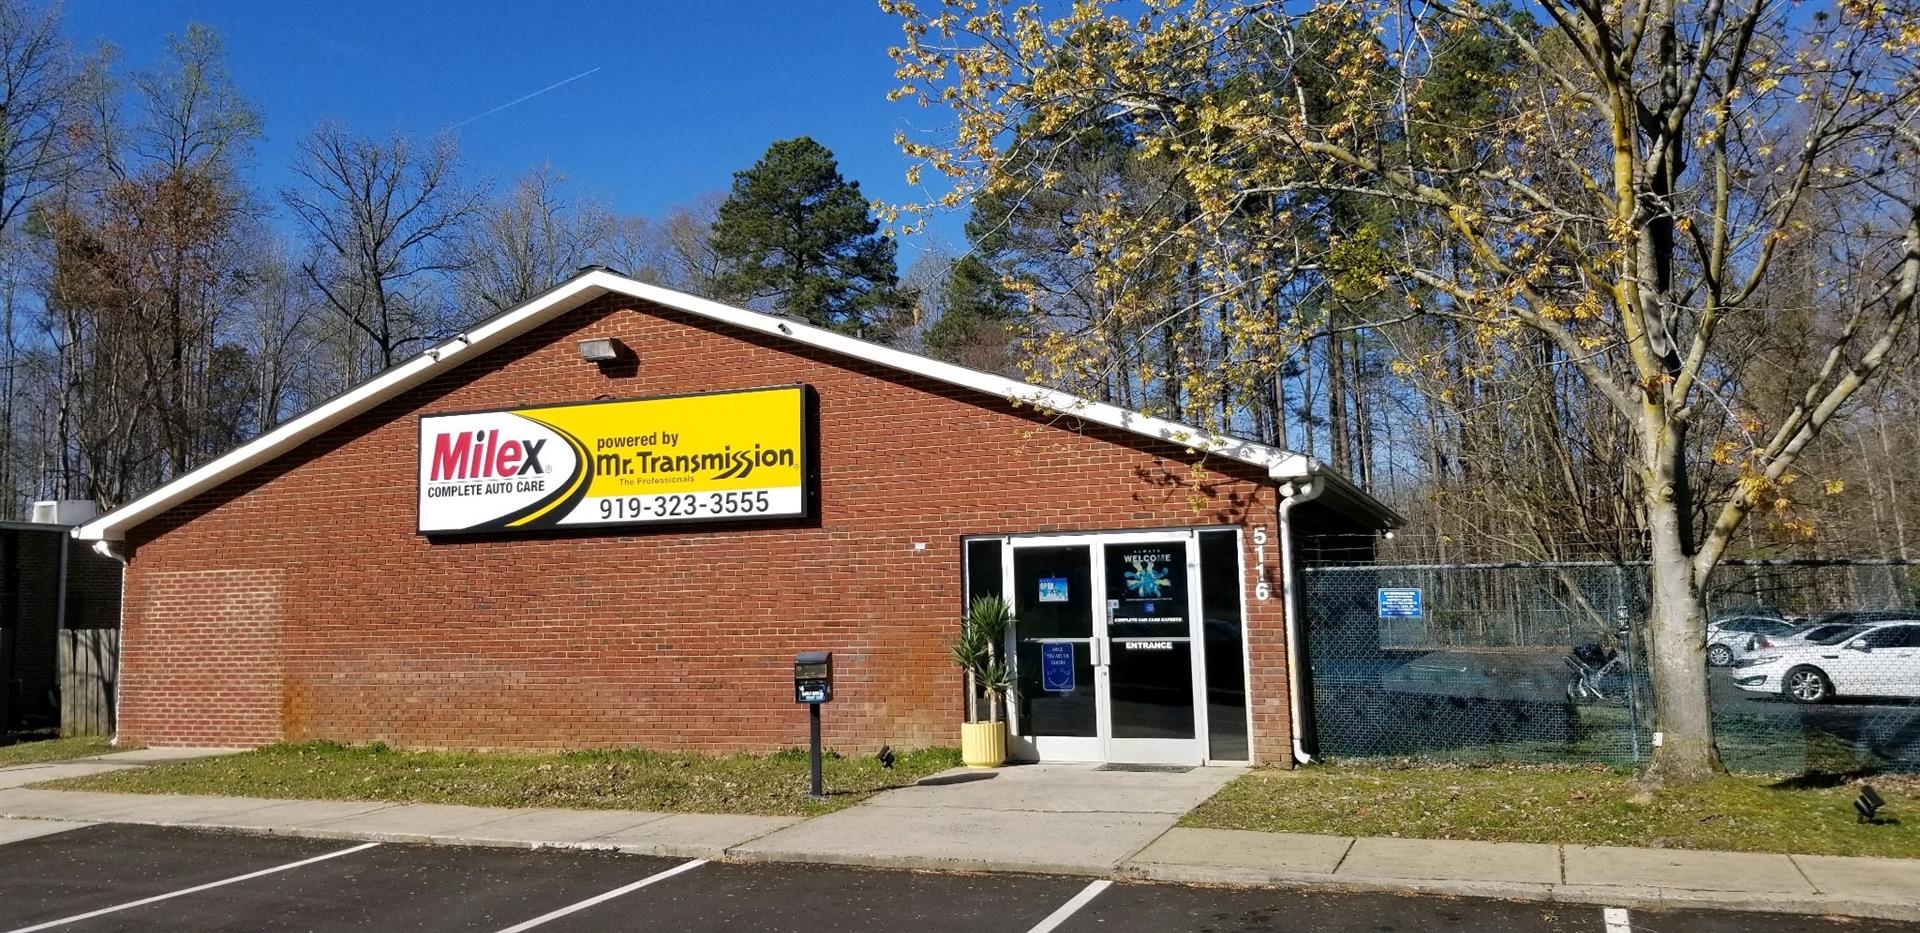 New Ownership Group Comes to Mr. Transmission/Milex Complete Auto Care Store in Durham, NC